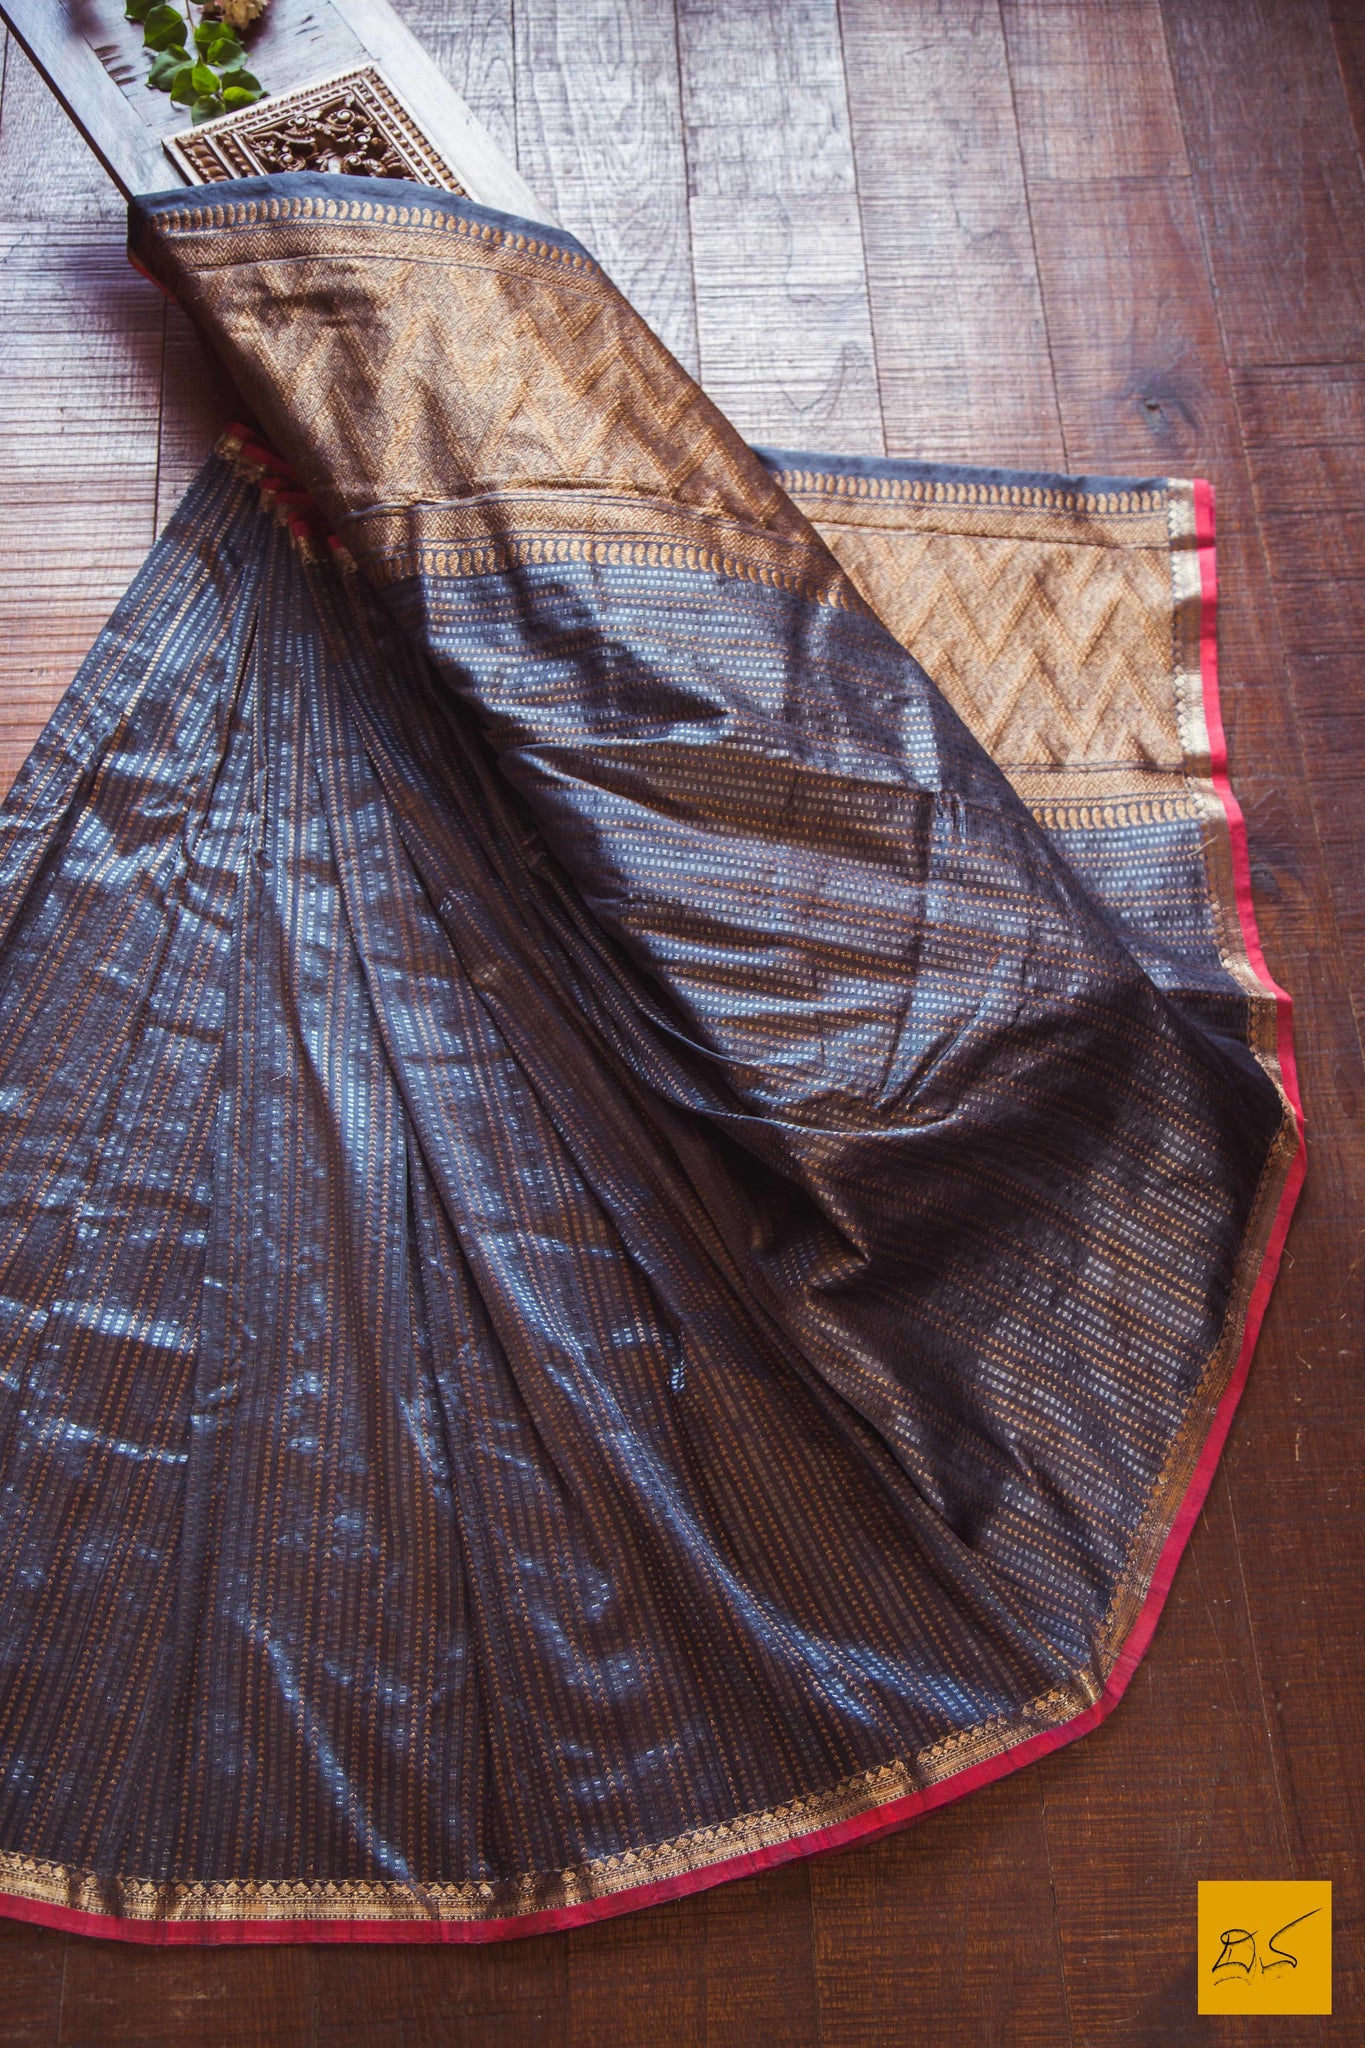 This is a gorgeous Banarasi tussar silk handwoven Saree with silver and gold zari patterned stripes and small border with red selvedge. The blouse is also unique with sona rupa zari patterned stripes. New trend of Banarasi Saree designs, Banarasi Saree for artists, art lovers, architects, saree lovers, Saree connoisseurs, musicians, dancers, doctors, Banarasi silk saree, indian saree images, latest sarees with price, only saree images, new Banarasi saree design.